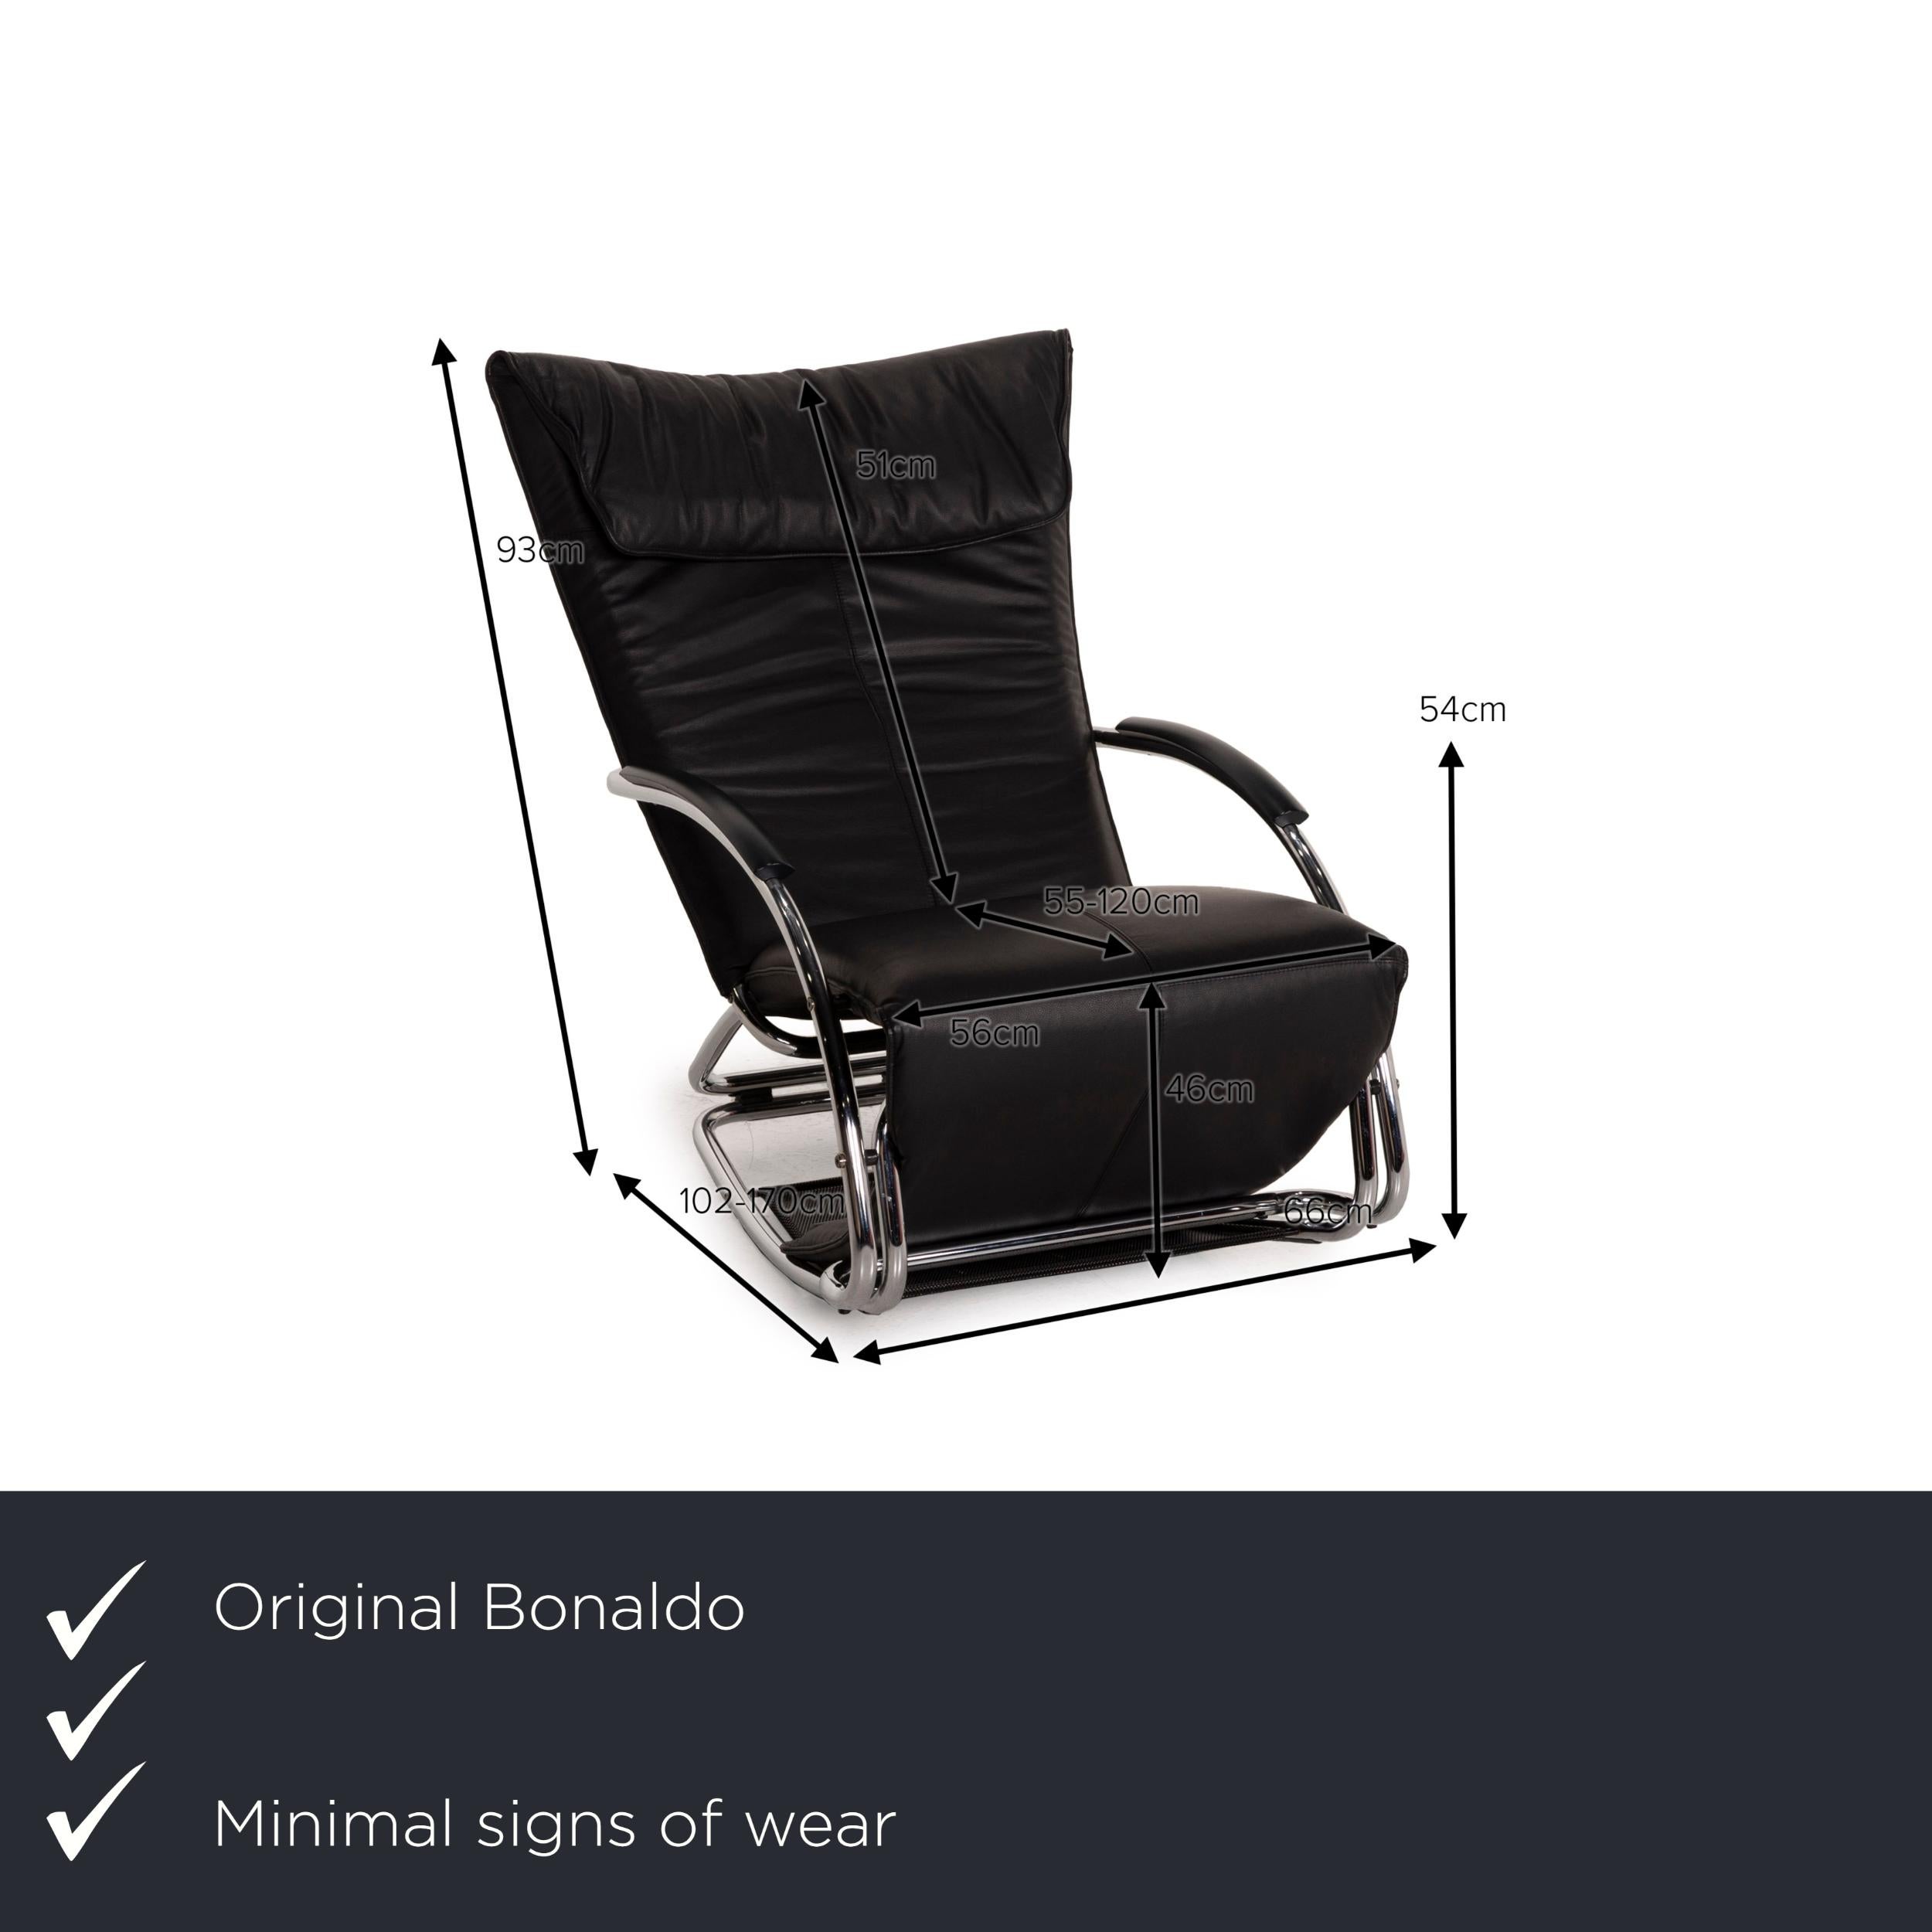 We present to you a Bonaldo Swing Plus leather armchair black reclining function.
 

 Product measurements in centimeters:
 

Depth: 102
Width: 66
Height: 93
Seat height: 46
Rest height: 54
Seat depth: 55
Seat width: 56
Back height: